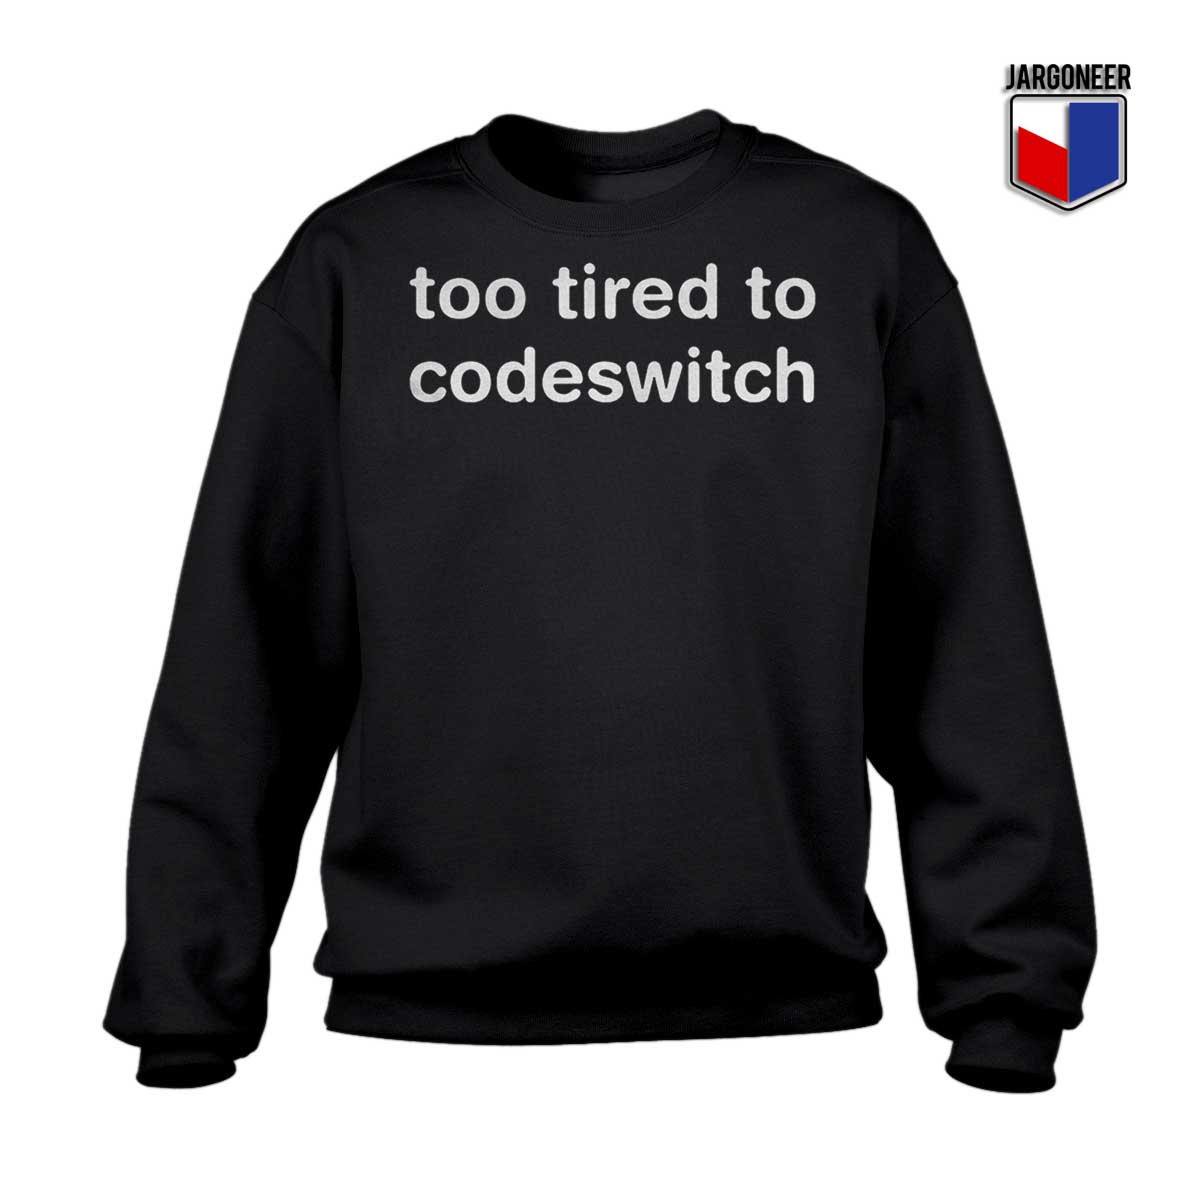 Too Tired to Codeswitch Sweatshirt - Shop Unique Graphic Cool Shirt Designs